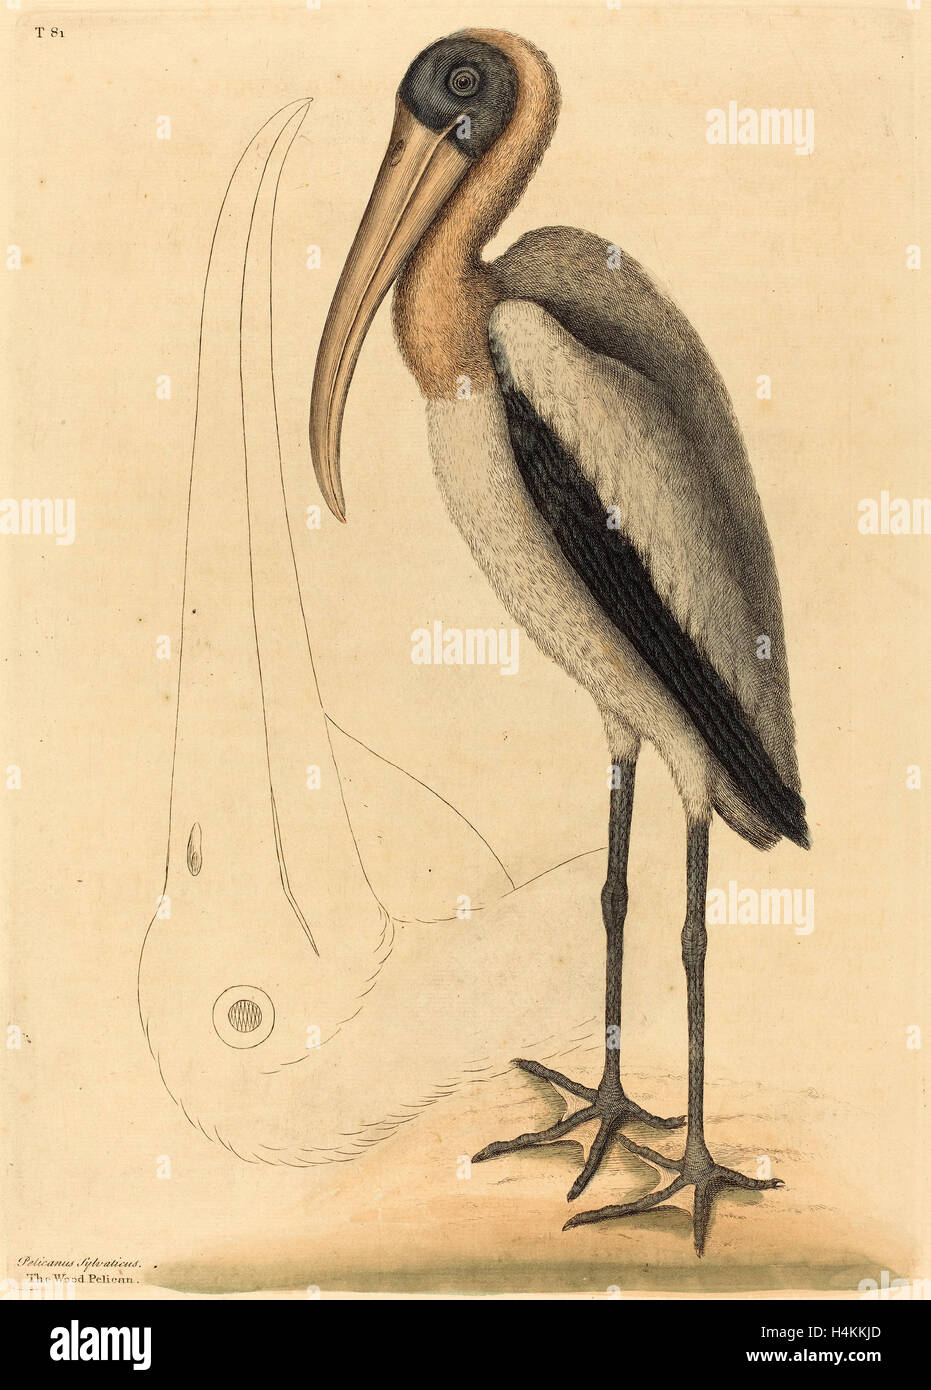 Mark Catesby (English, 1679 - 1749), The Wood Pelican (Tantalus Loculator), published 1731-1743, hand-colored engraving Stock Photo